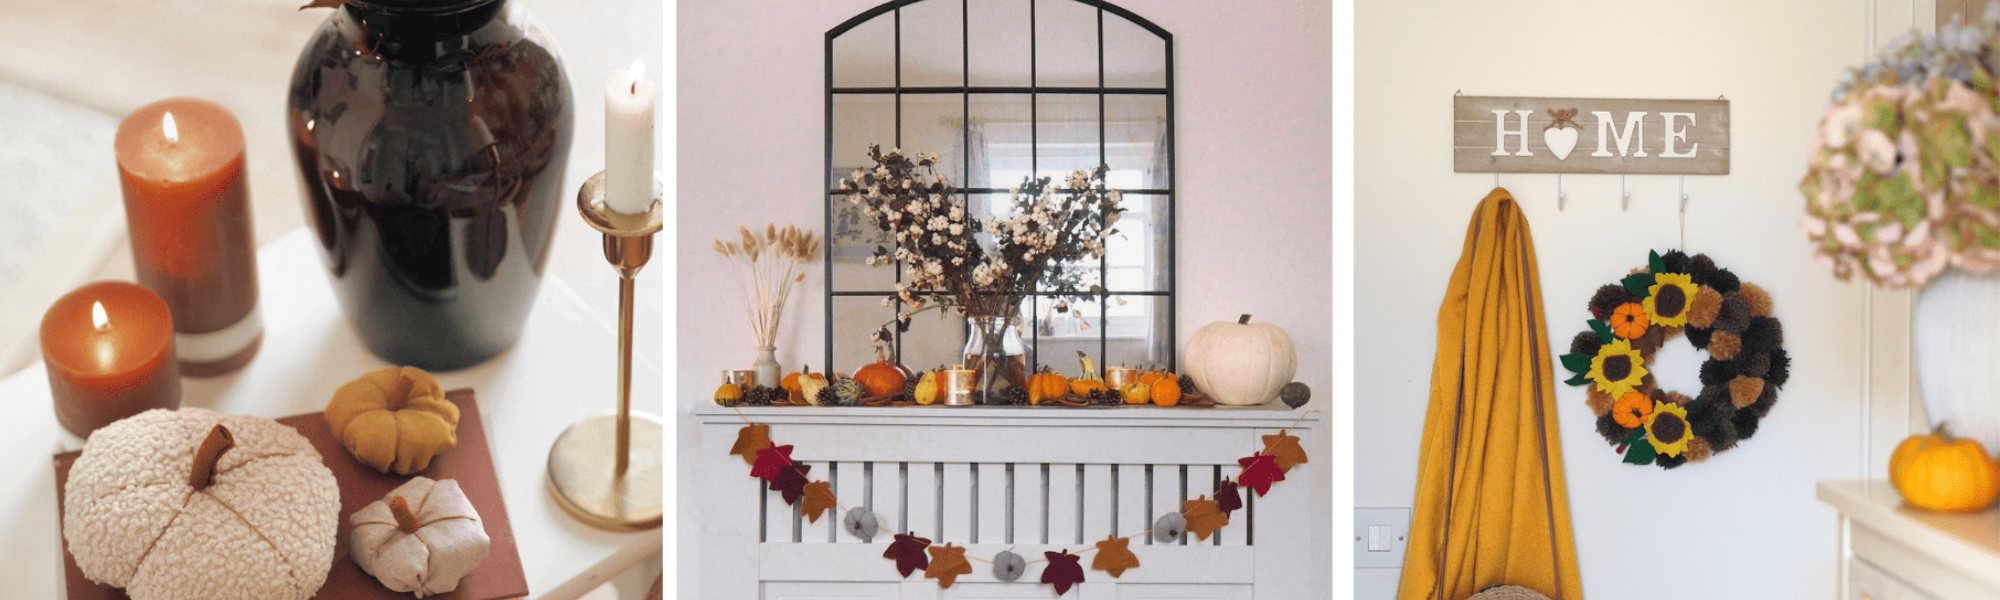 DIY Autumn home decor you can make yourself on a budget. Fall crafts and decor inspiration. From Autumn leaf garlands to wreaths and a pumpkin doormat